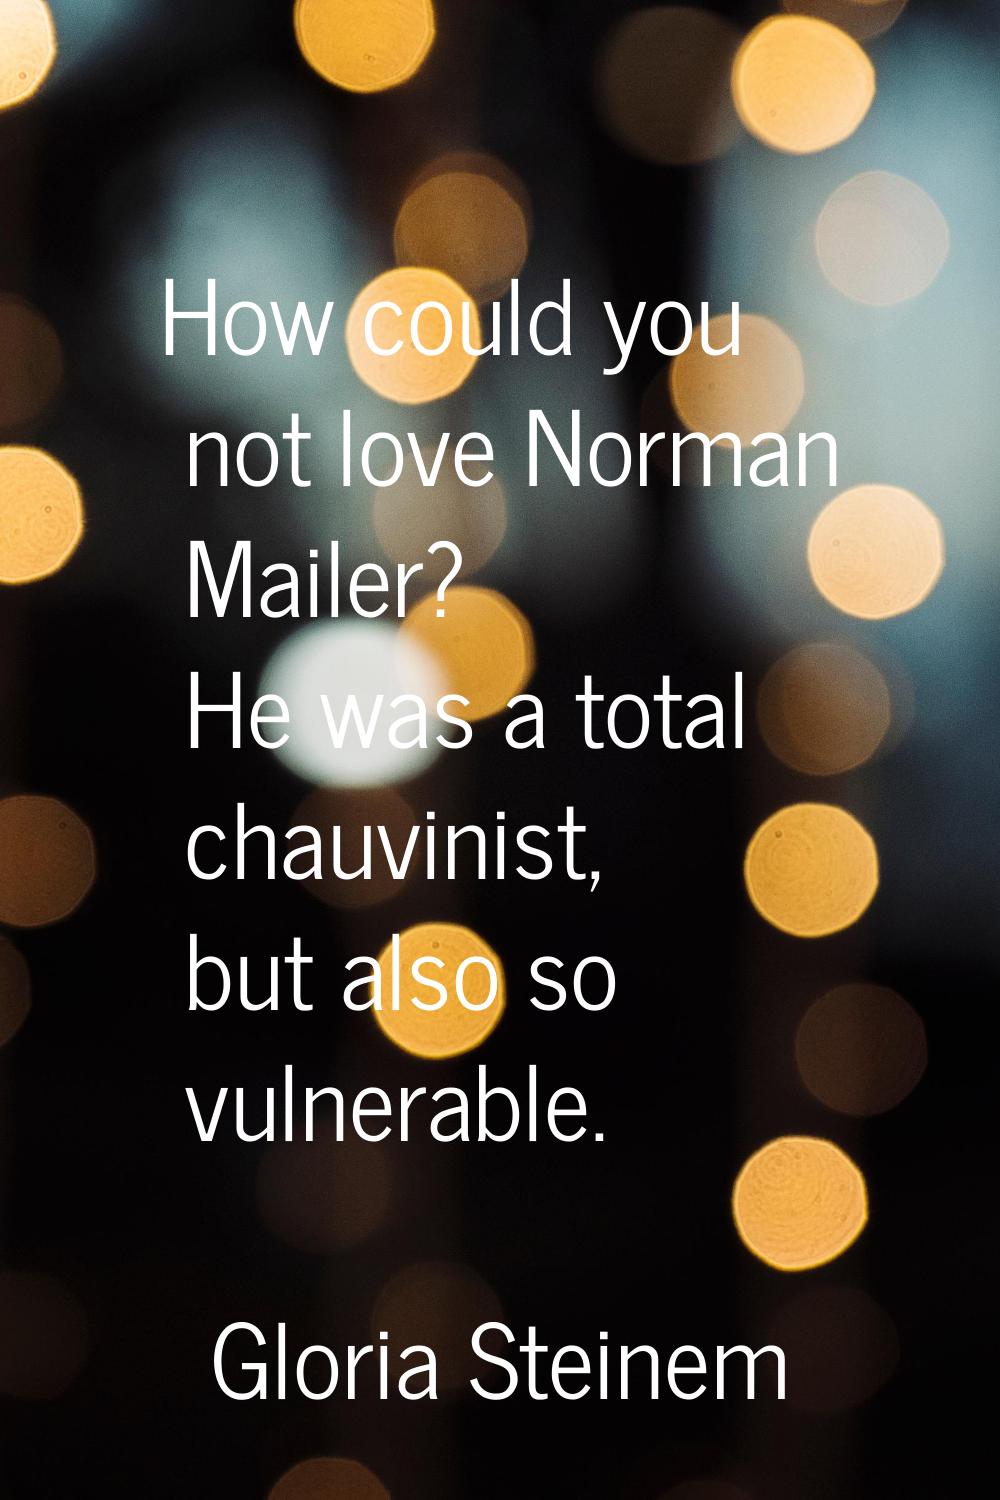 How could you not love Norman Mailer? He was a total chauvinist, but also so vulnerable.